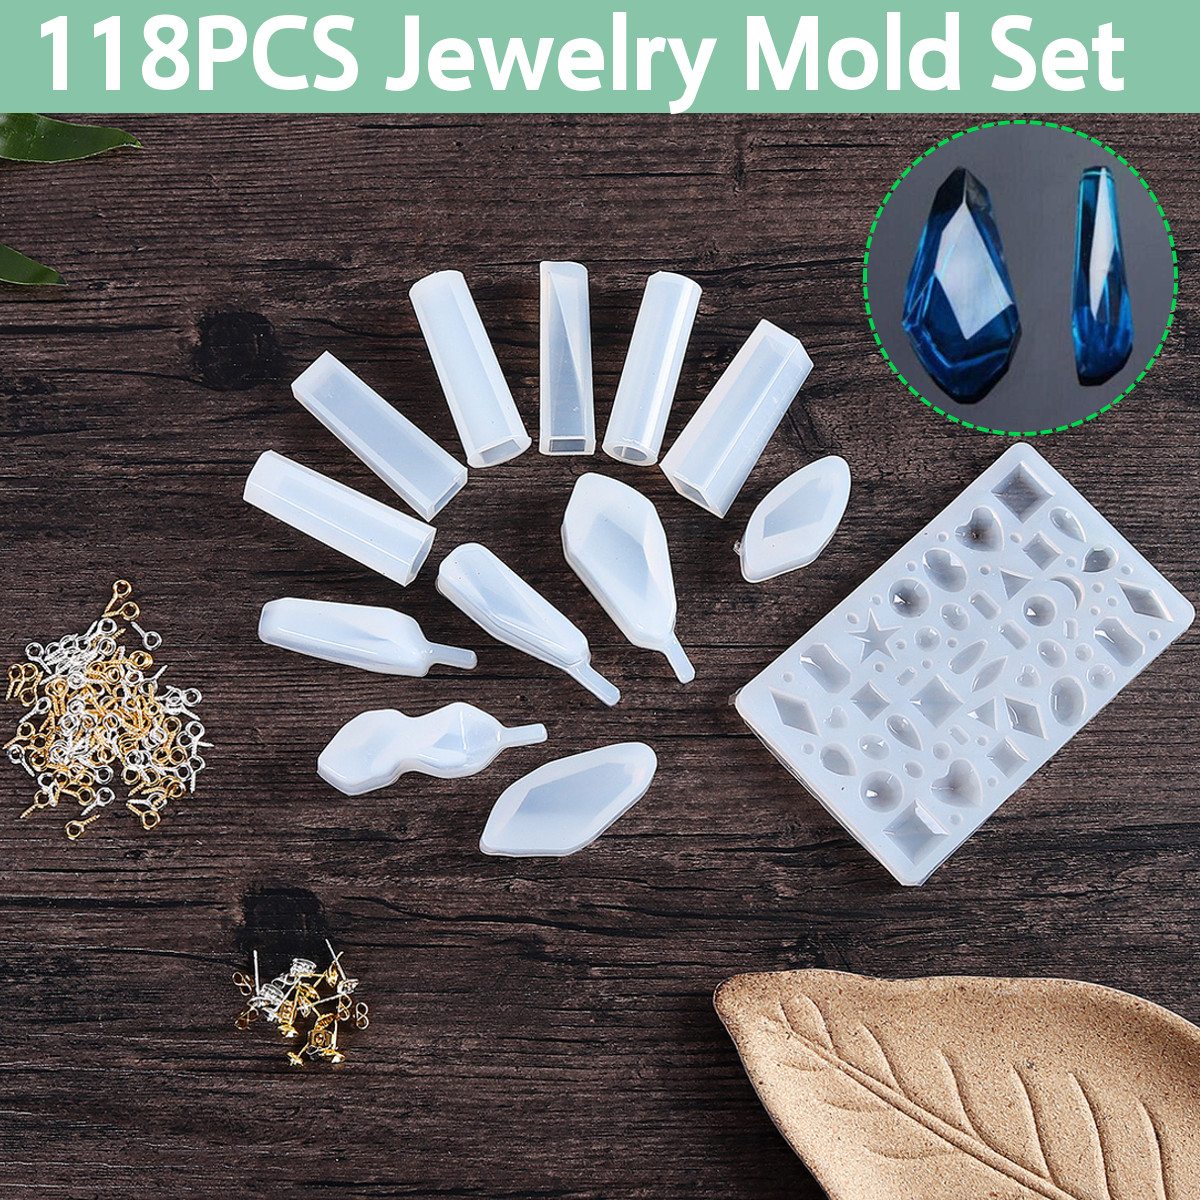 118PCS-DIY-Crystal-Glue-Resin-Silicone-Jewelry-Molds-Project-Gift-Pendant-Decoration-Mould-Tools-Set-1664749-1